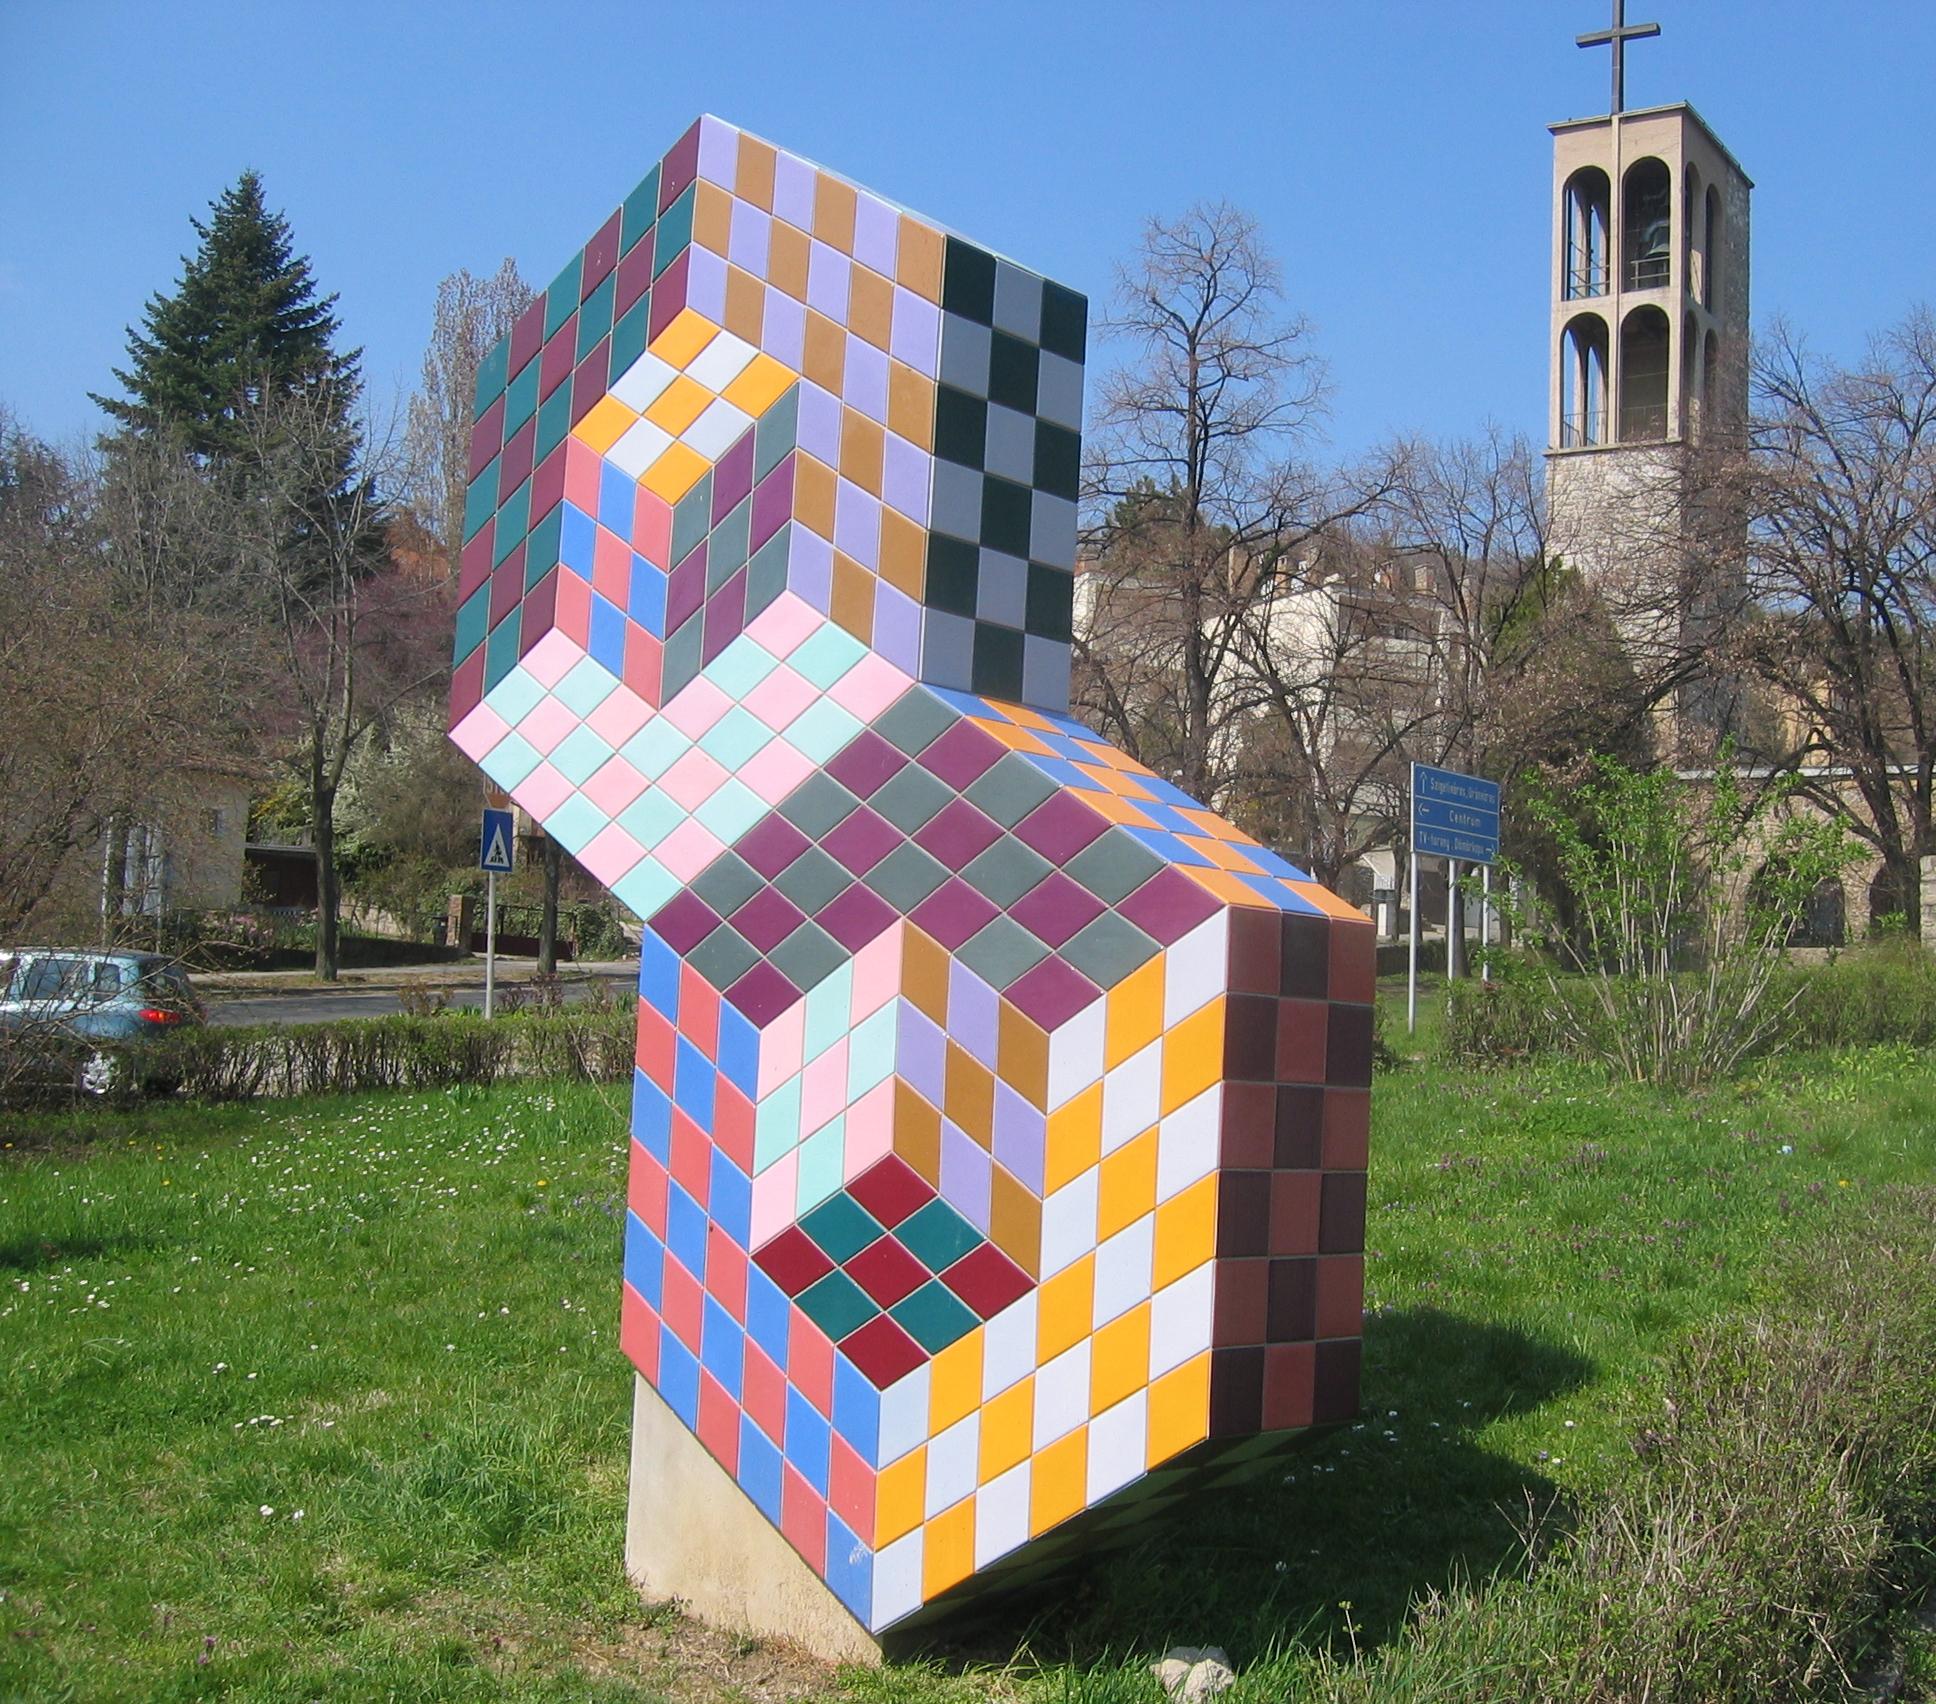 Sculpture made of cubes, covered with a colorful checkerboard pattern 